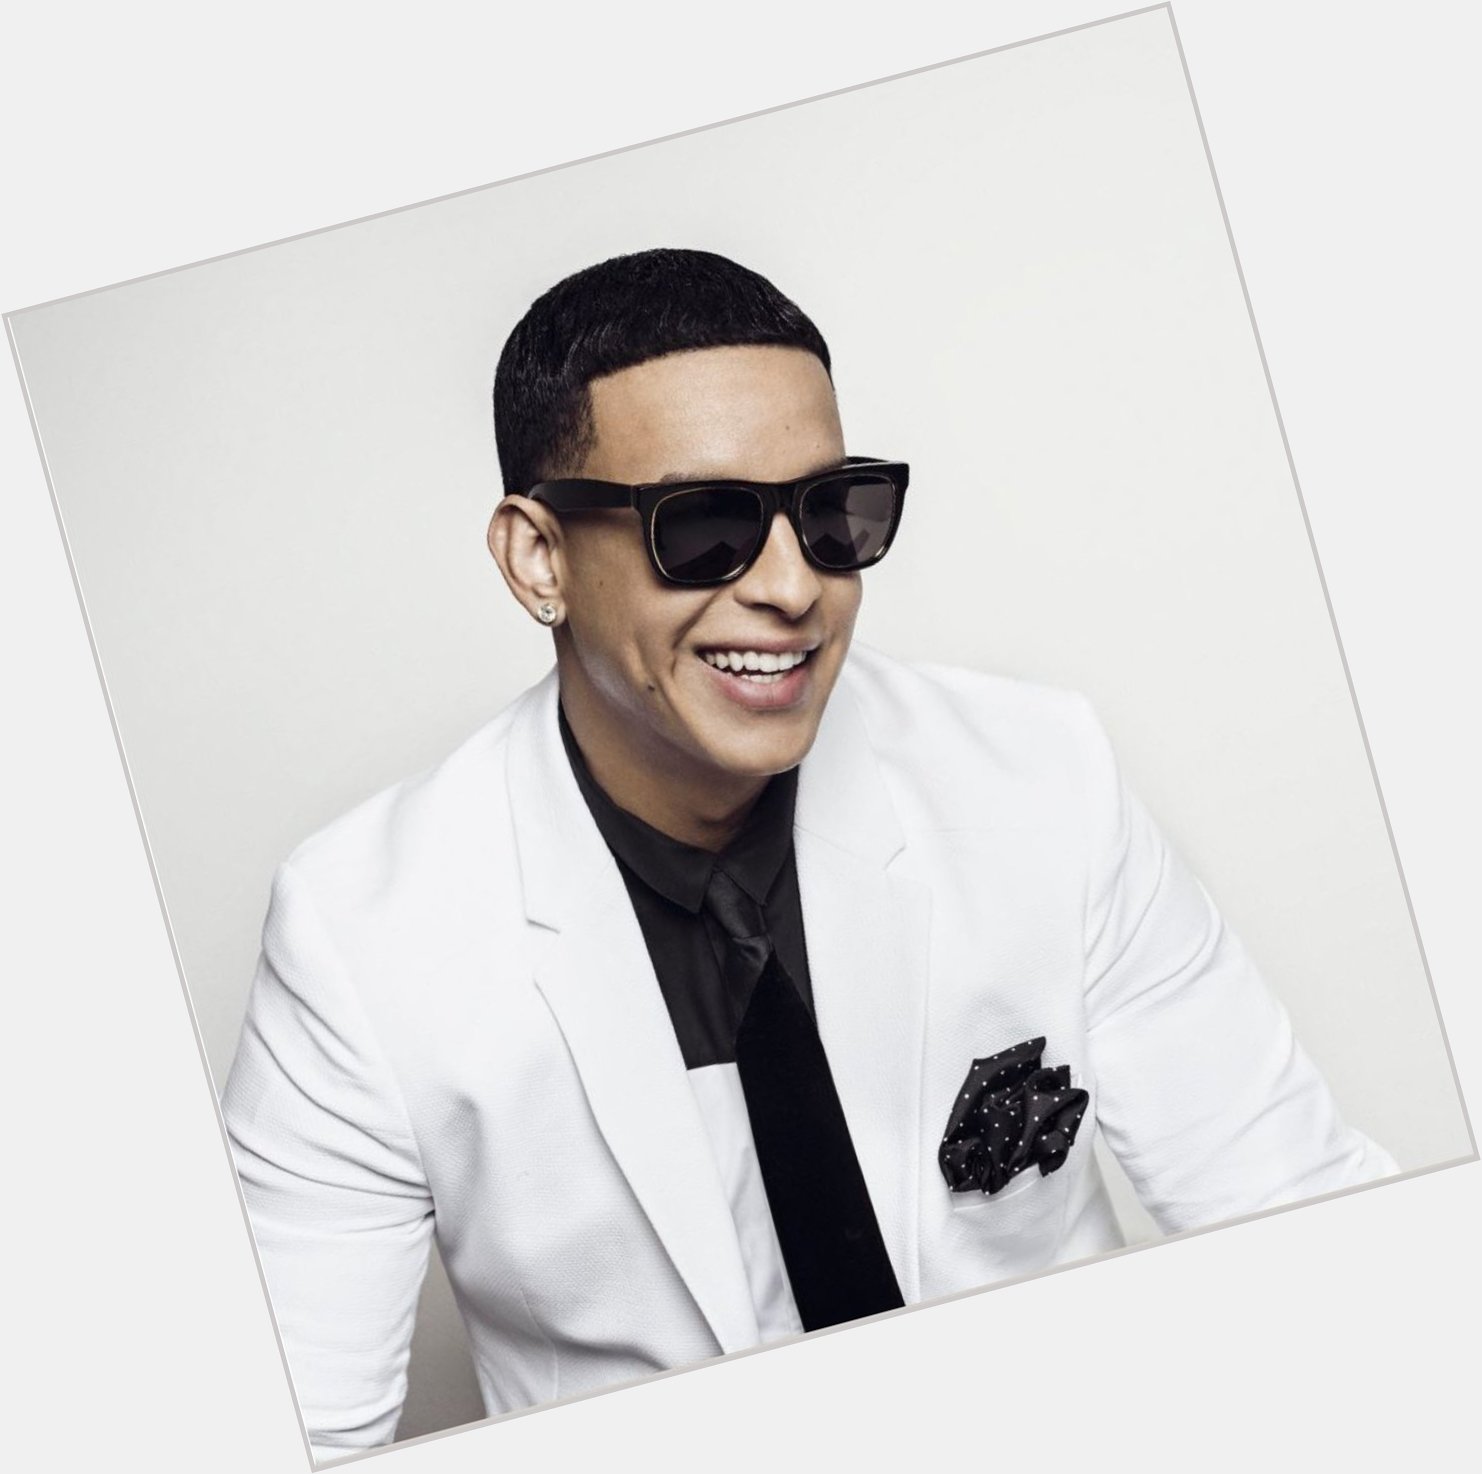 Happy Birthday to Daddy Yankee   About:  